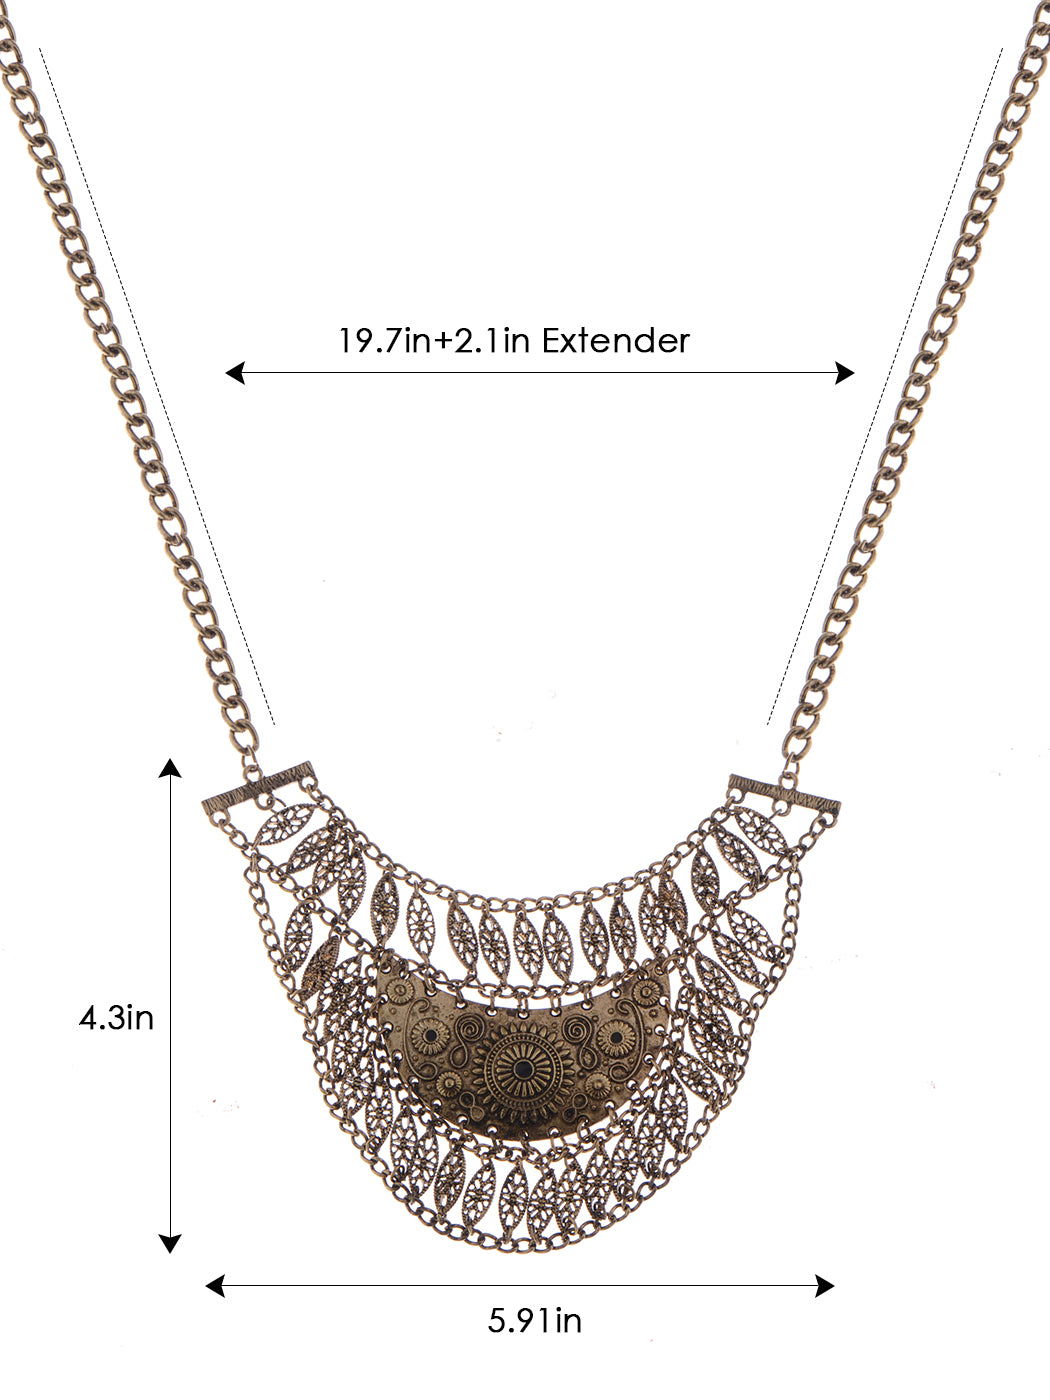 Bohemian Pendant Linked Chain Necklace